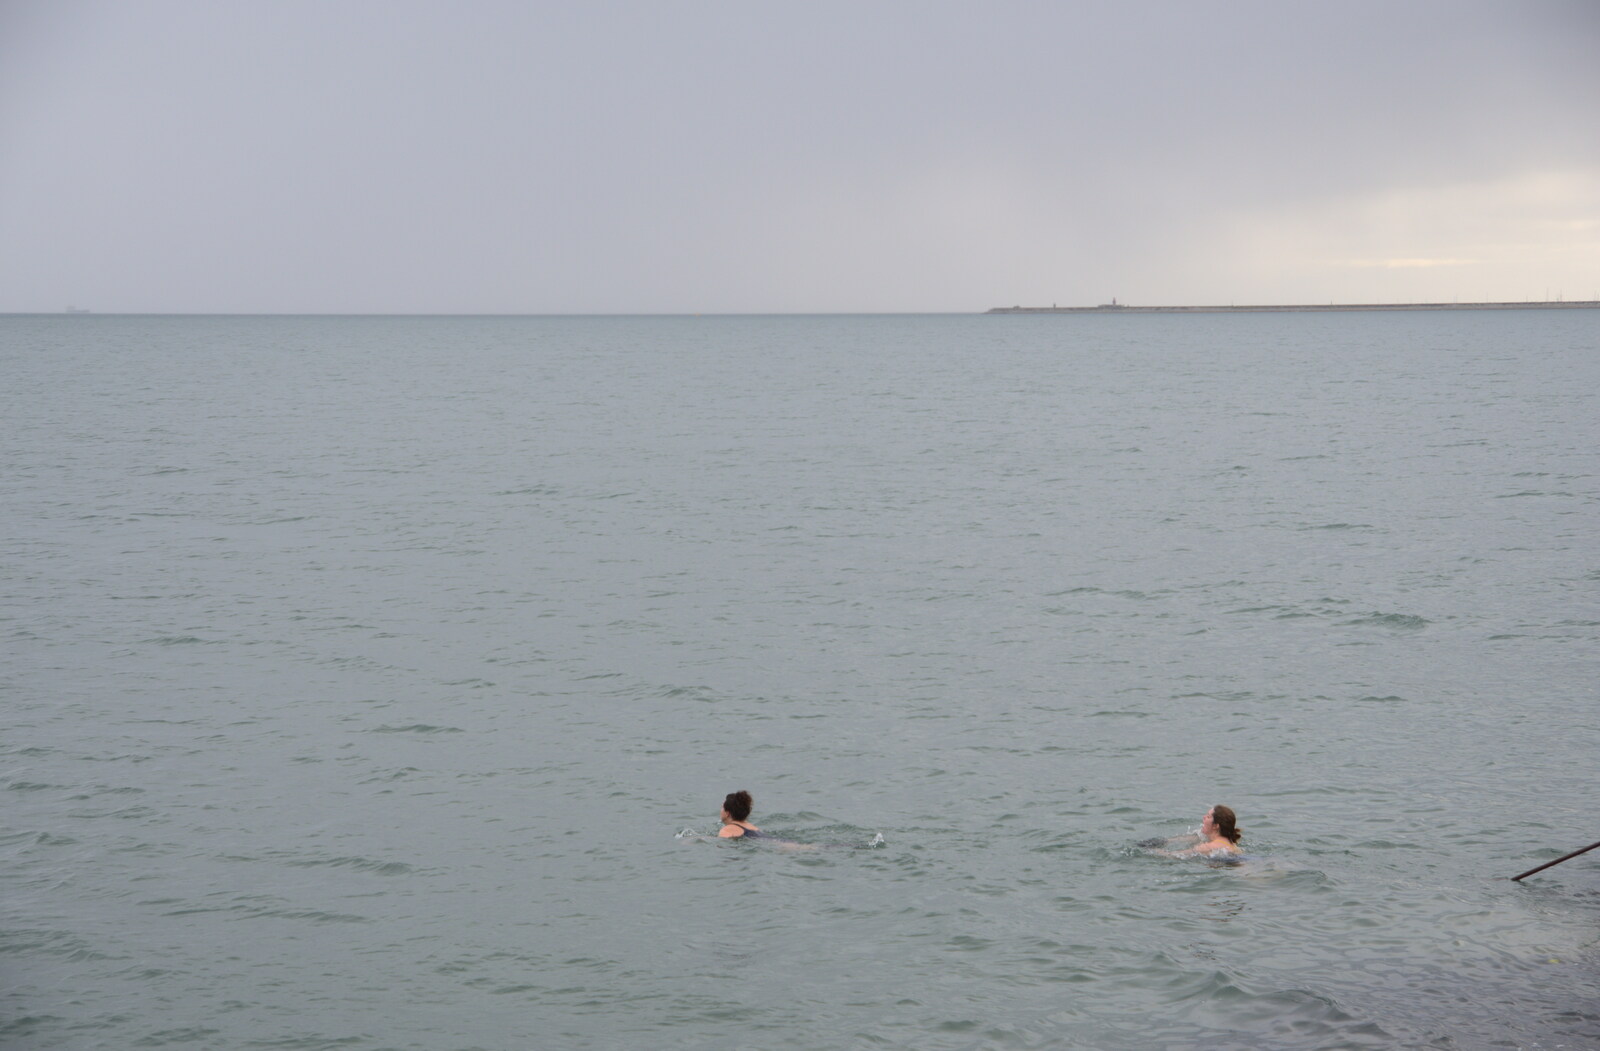 The End of the Breffni, Blackrock, Dublin - 18th February 2023: Evelyn and Isobel are in the sea again